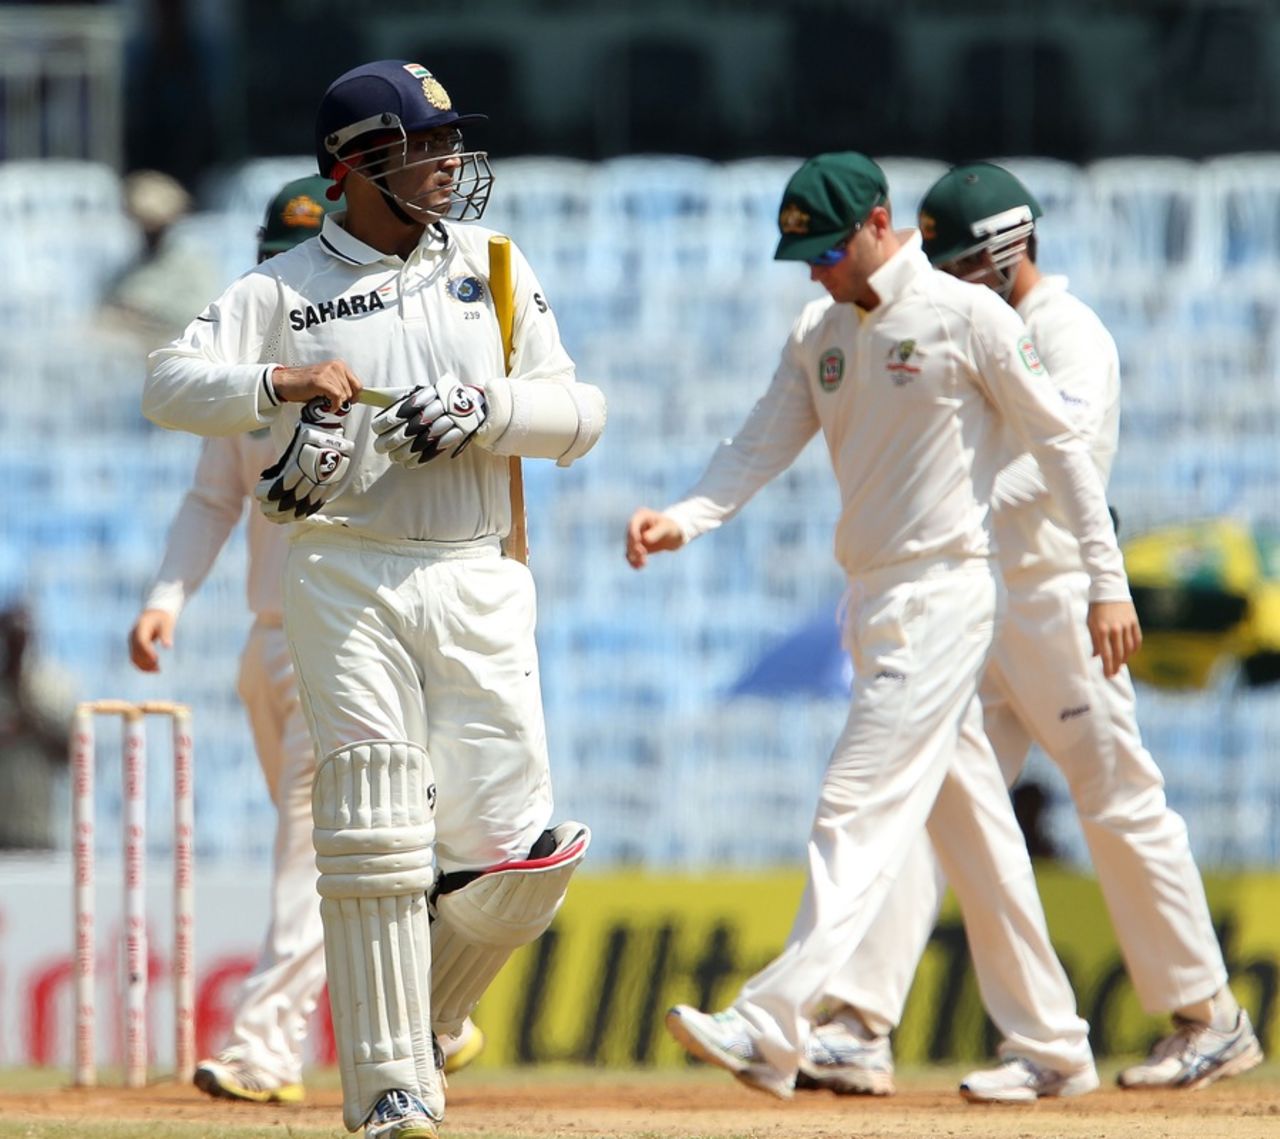 Virender Sehwag was dismissed for 19 by Nathan Lyon, India v Australia, 1st Test, Chennai, 5th day, February 26, 2013